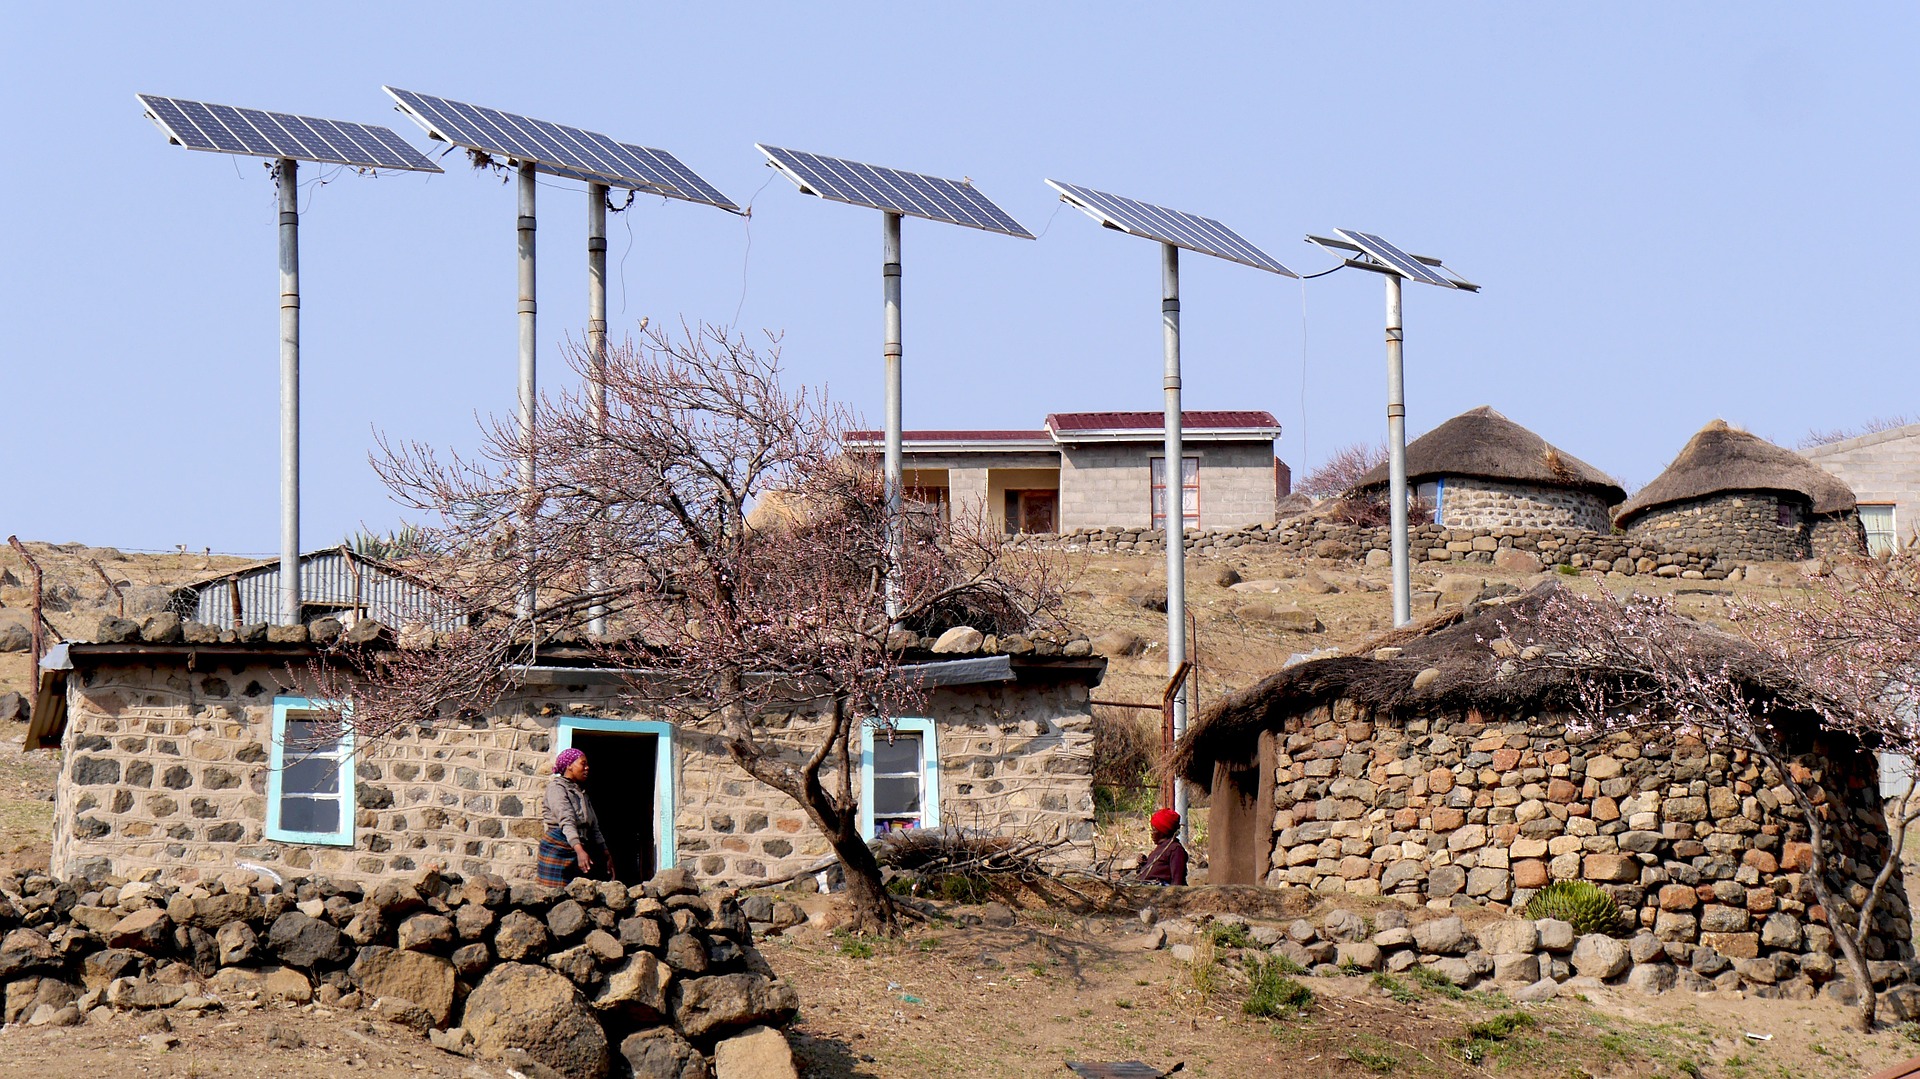 Solar technology based mini grid and home systems are a possibility for off-grid areas